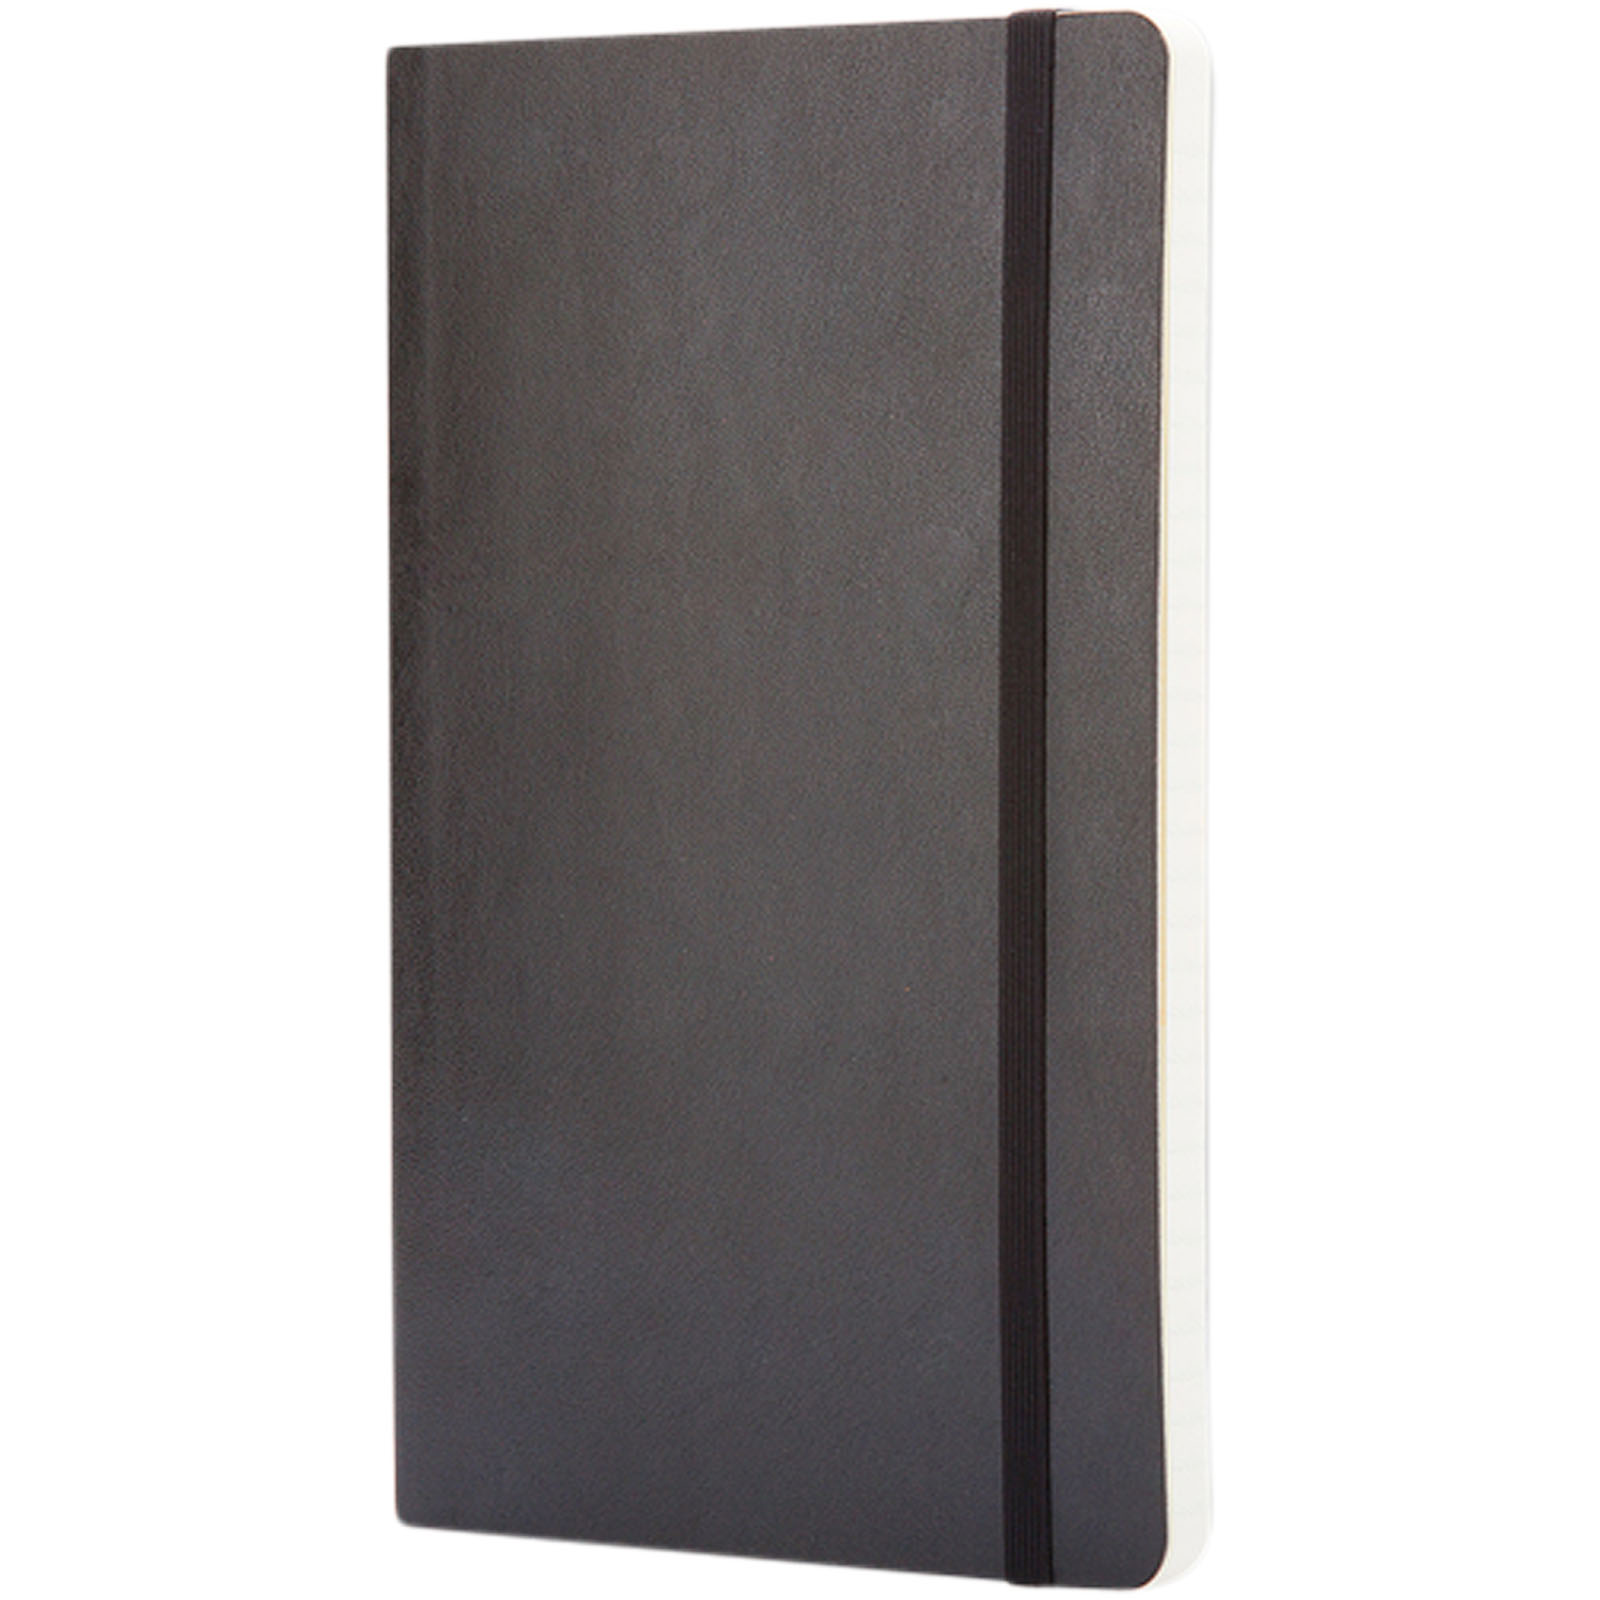 A soft cover notebook with dots from Little Snoring - Abbotswood